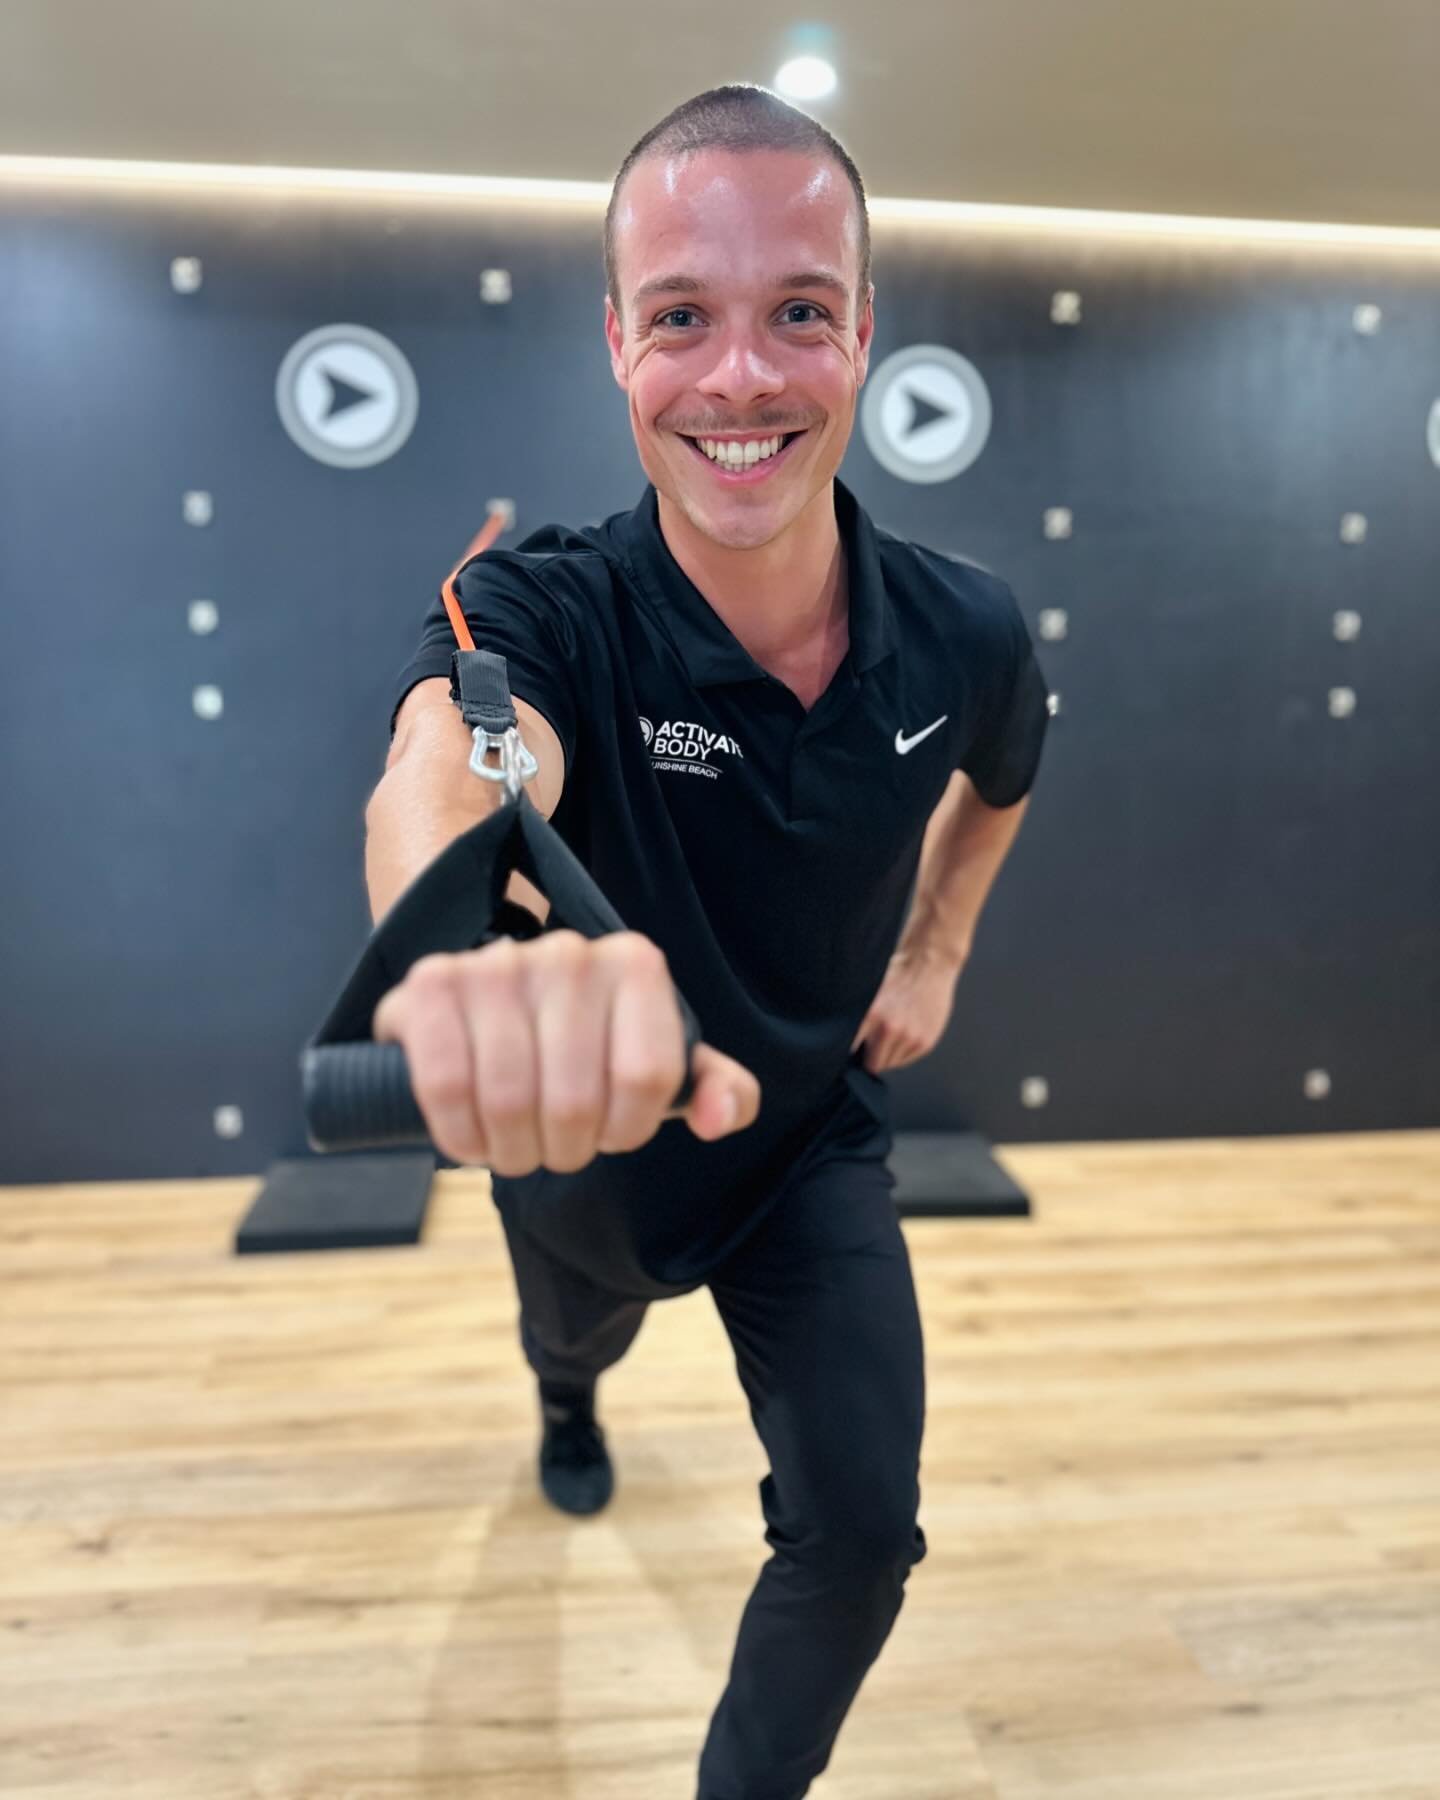 We are thrilled to welcome our new physiotherapist, Ed Hanrahan to our ActivateBody Team! Here&rsquo;s a few words from Ed&hellip;

Hi, I&rsquo;m Ed, a physiotherapist with a particular interest in musculoskeletal and sports injuries, as well as chro